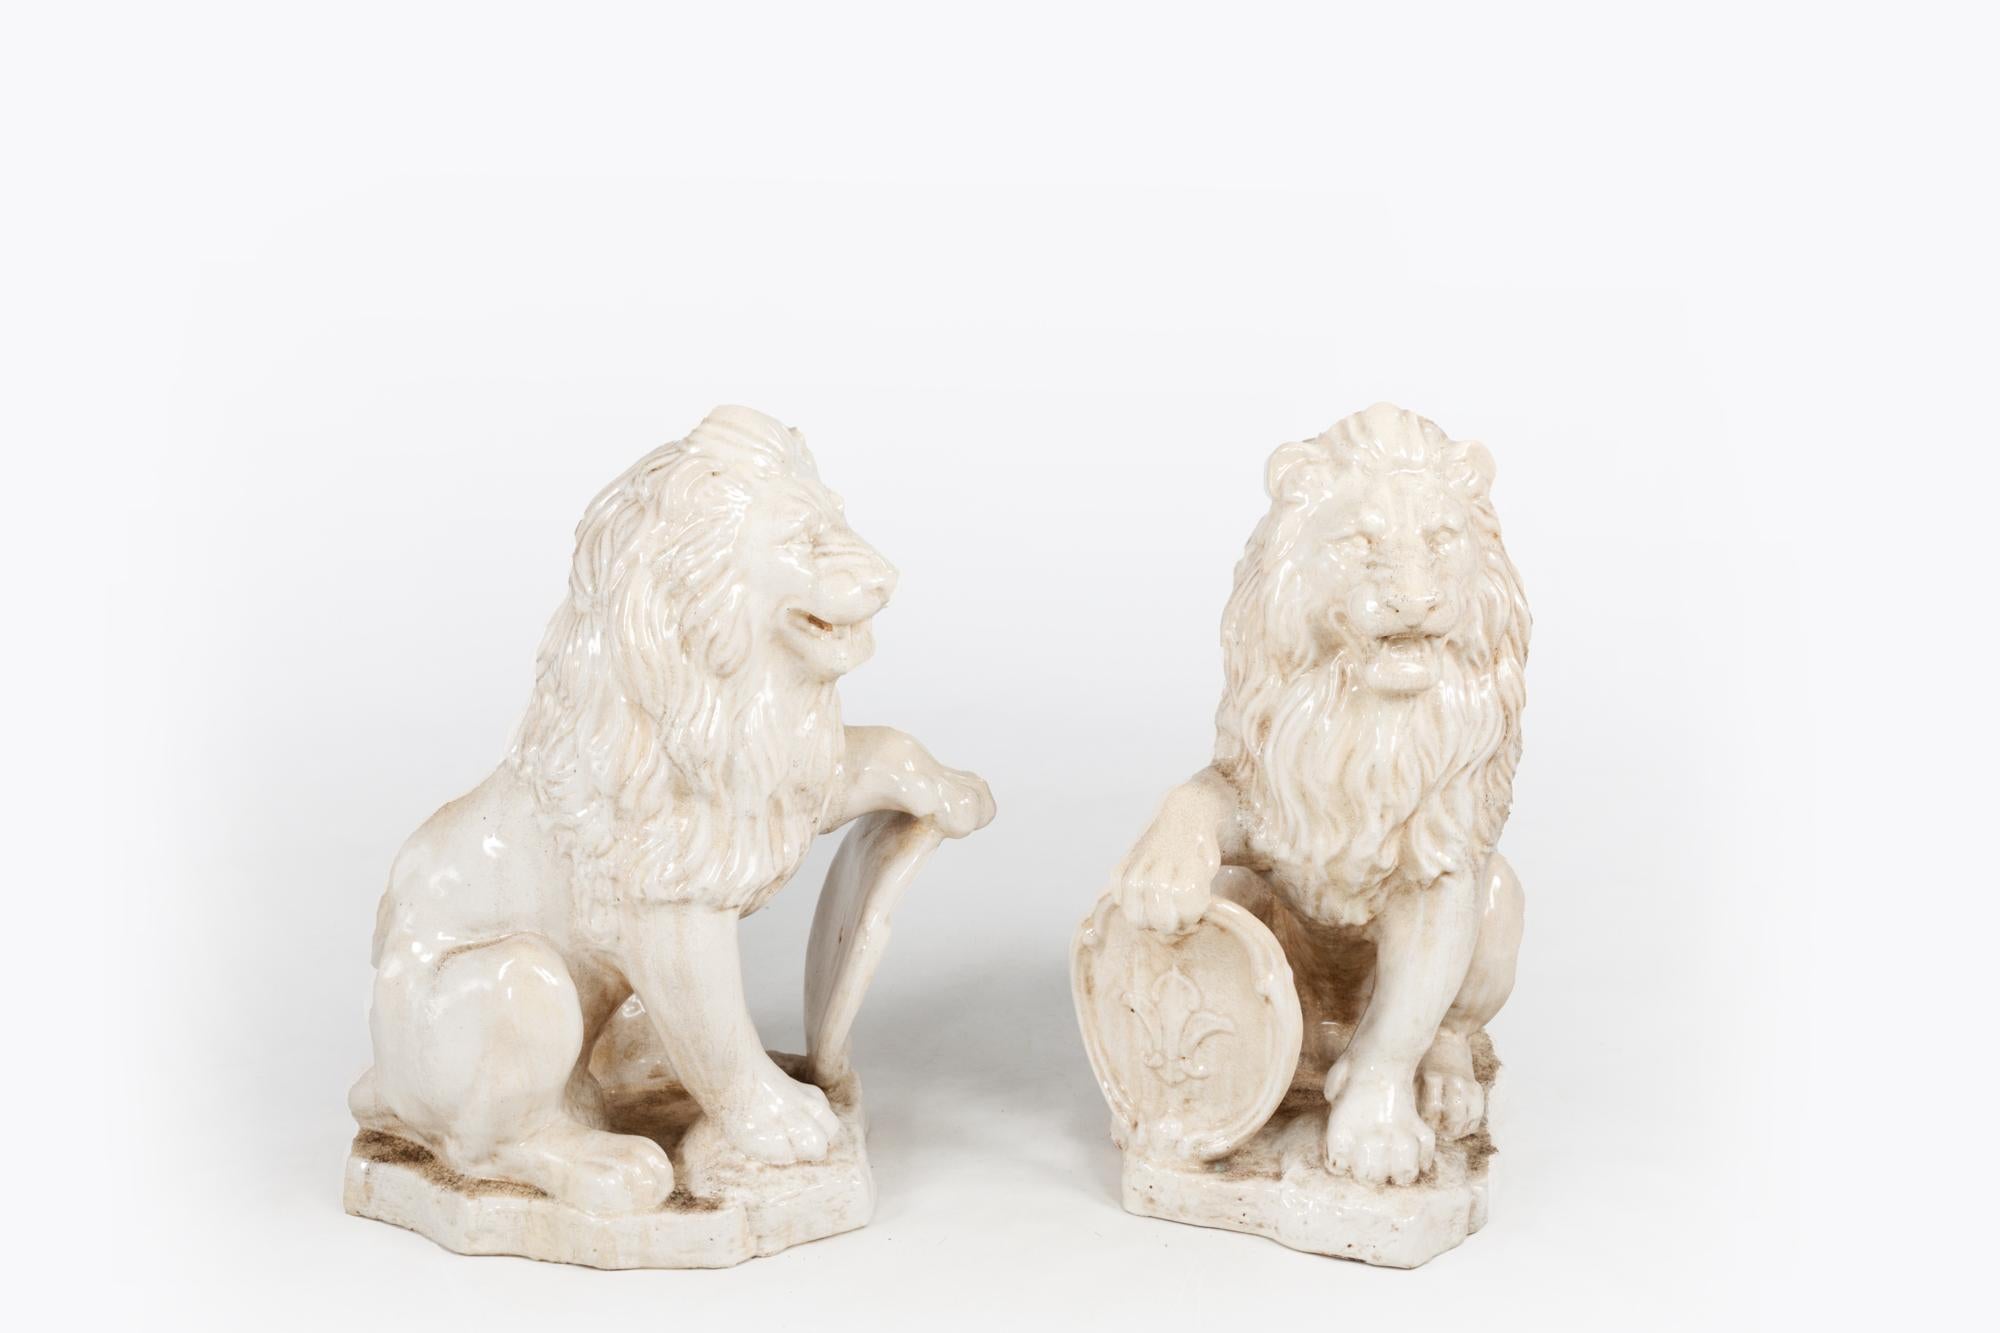 Mid-19th century pair of French painted and glazed terracotta lions grasping oval Fleur De Lis shields while resting on shaped plinths. Circa 1840.

Sculptures of lions were often found in homes in the 18th & 19th centuries, where they were